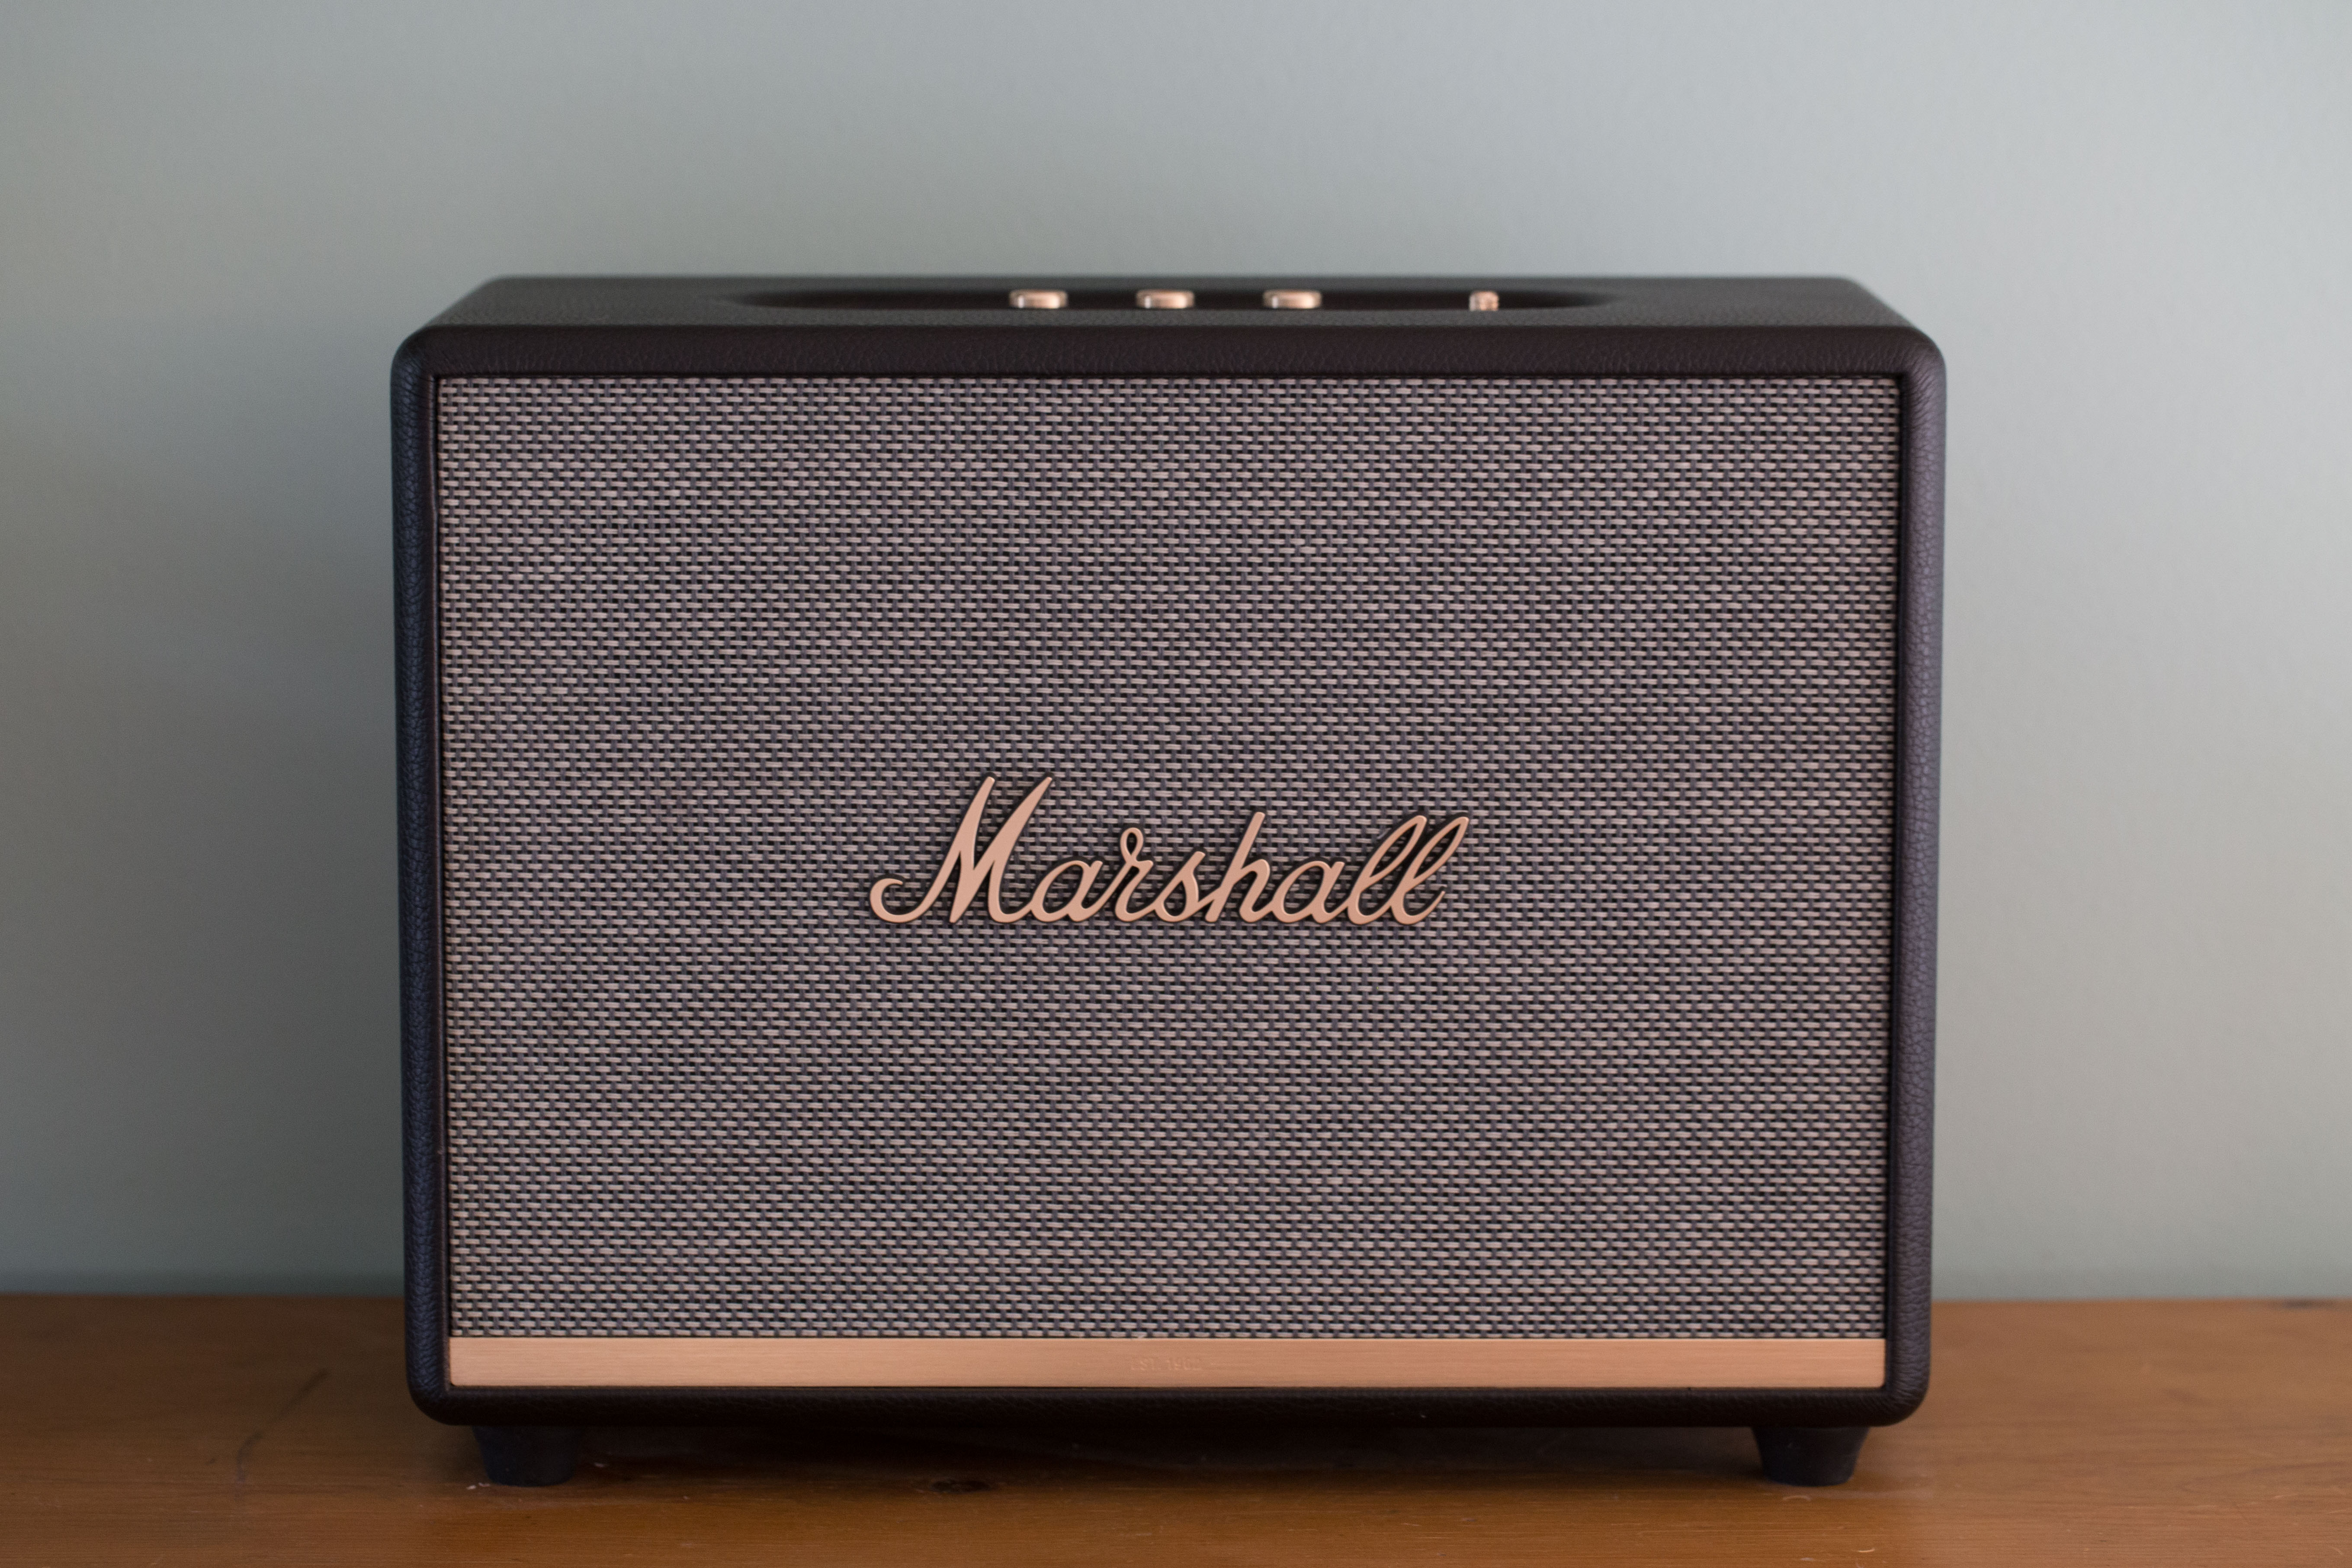 Review: The Marshall Woburn II packs modern sound, retro look